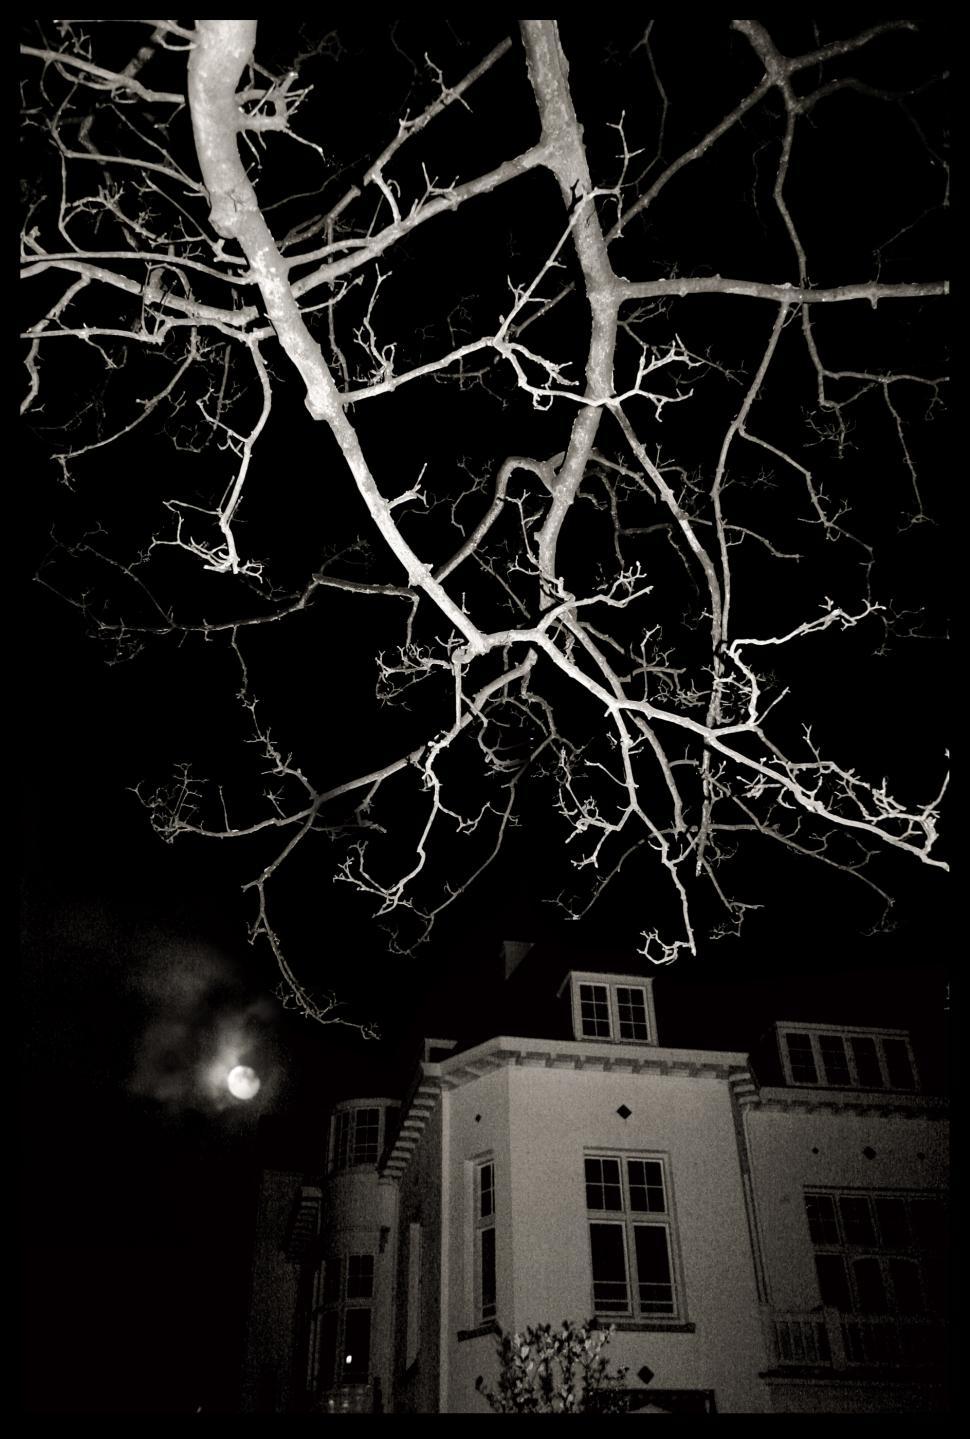 Free Image of Haunted house at night 